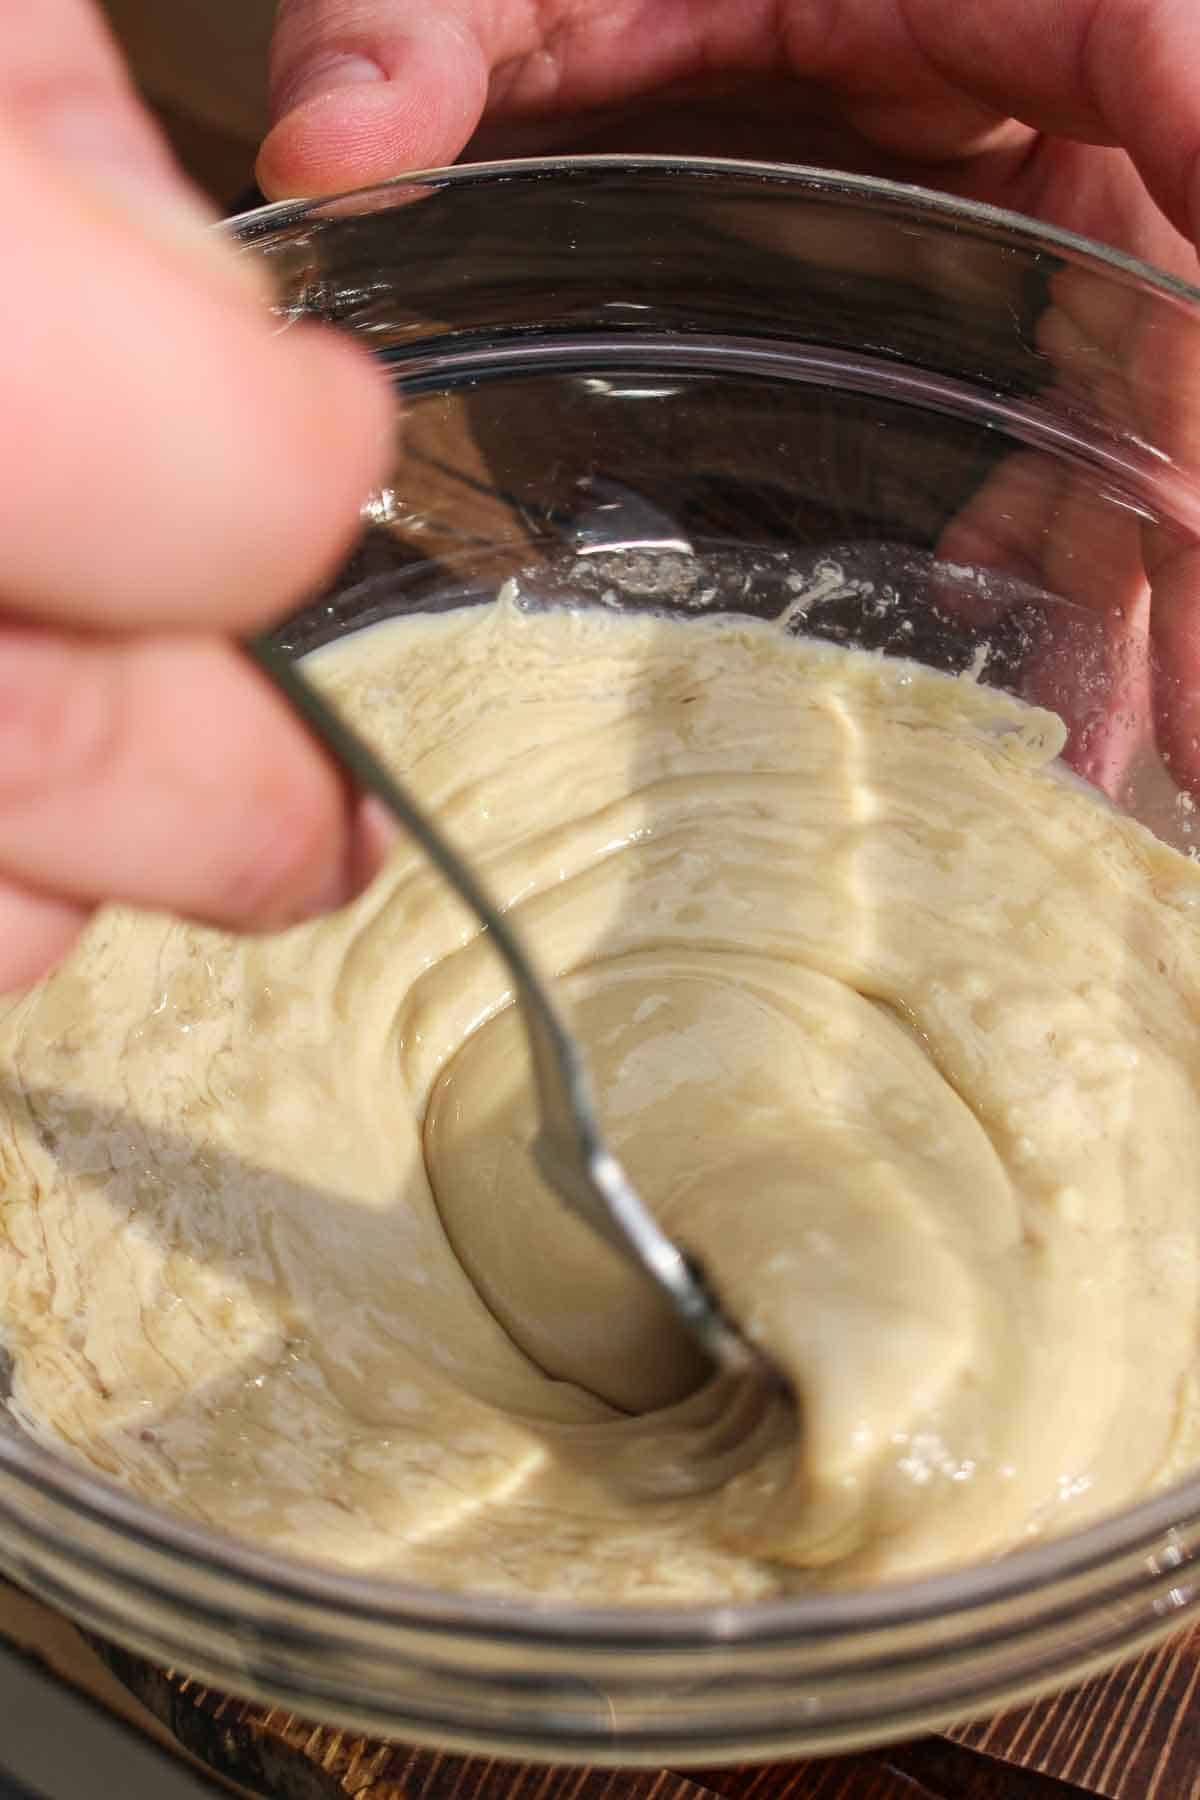 The tahini sauce being mixed together before being set to the side.